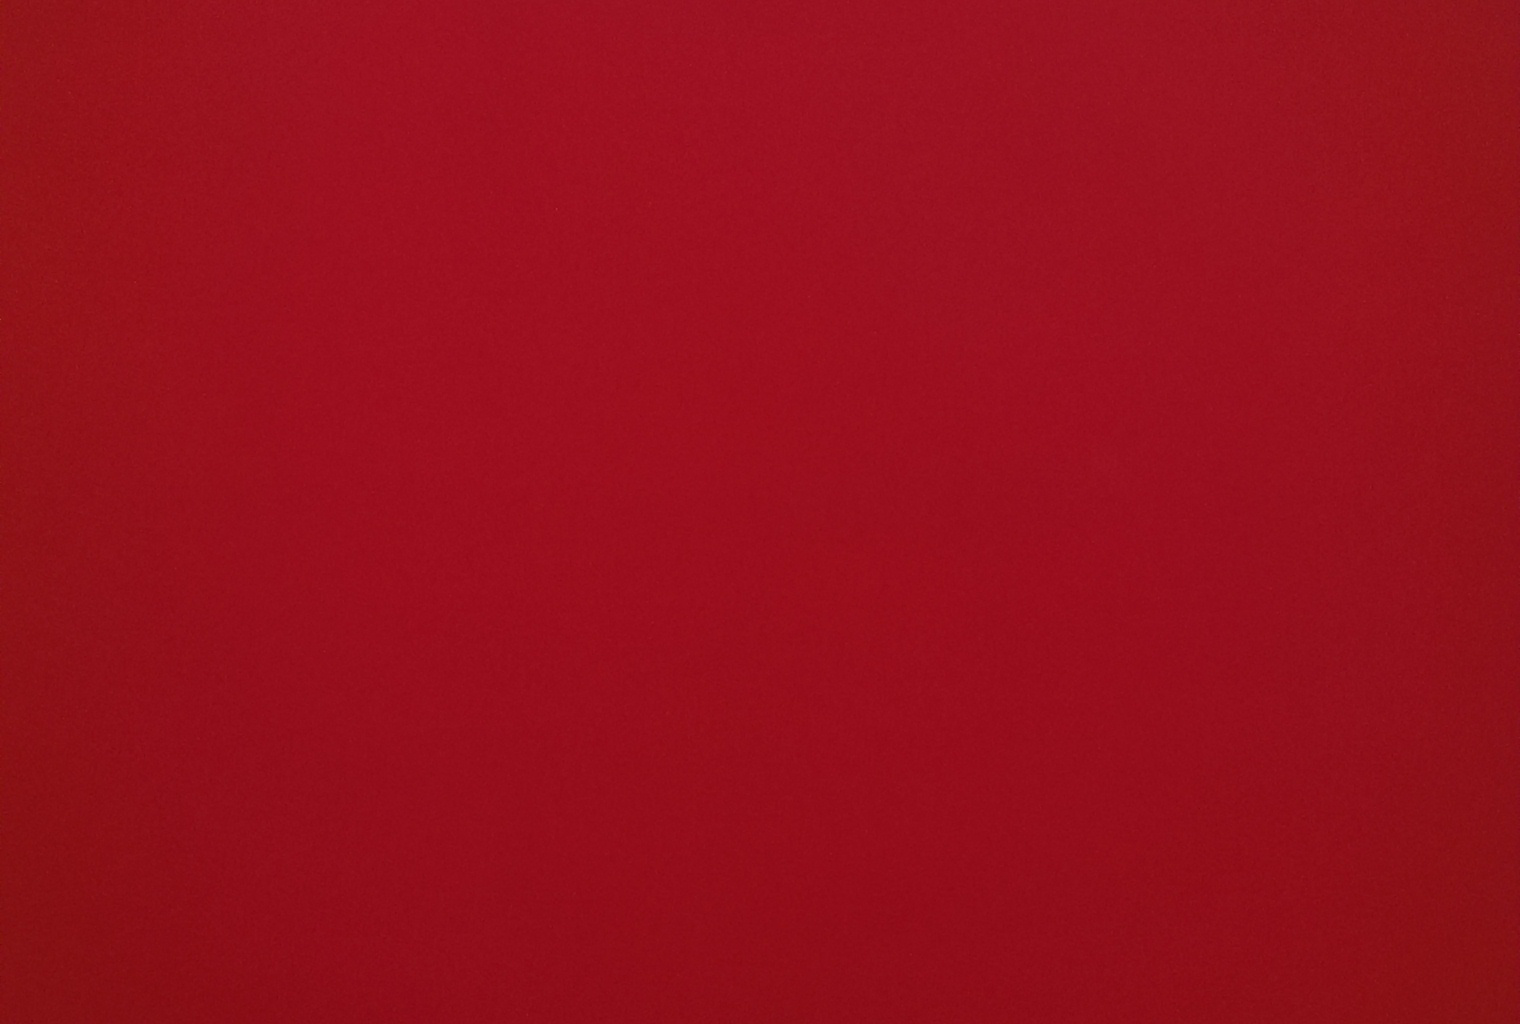 Part of the middle of Barnett Newman's Vir Heroicus Sublimis. Click to enlarge.